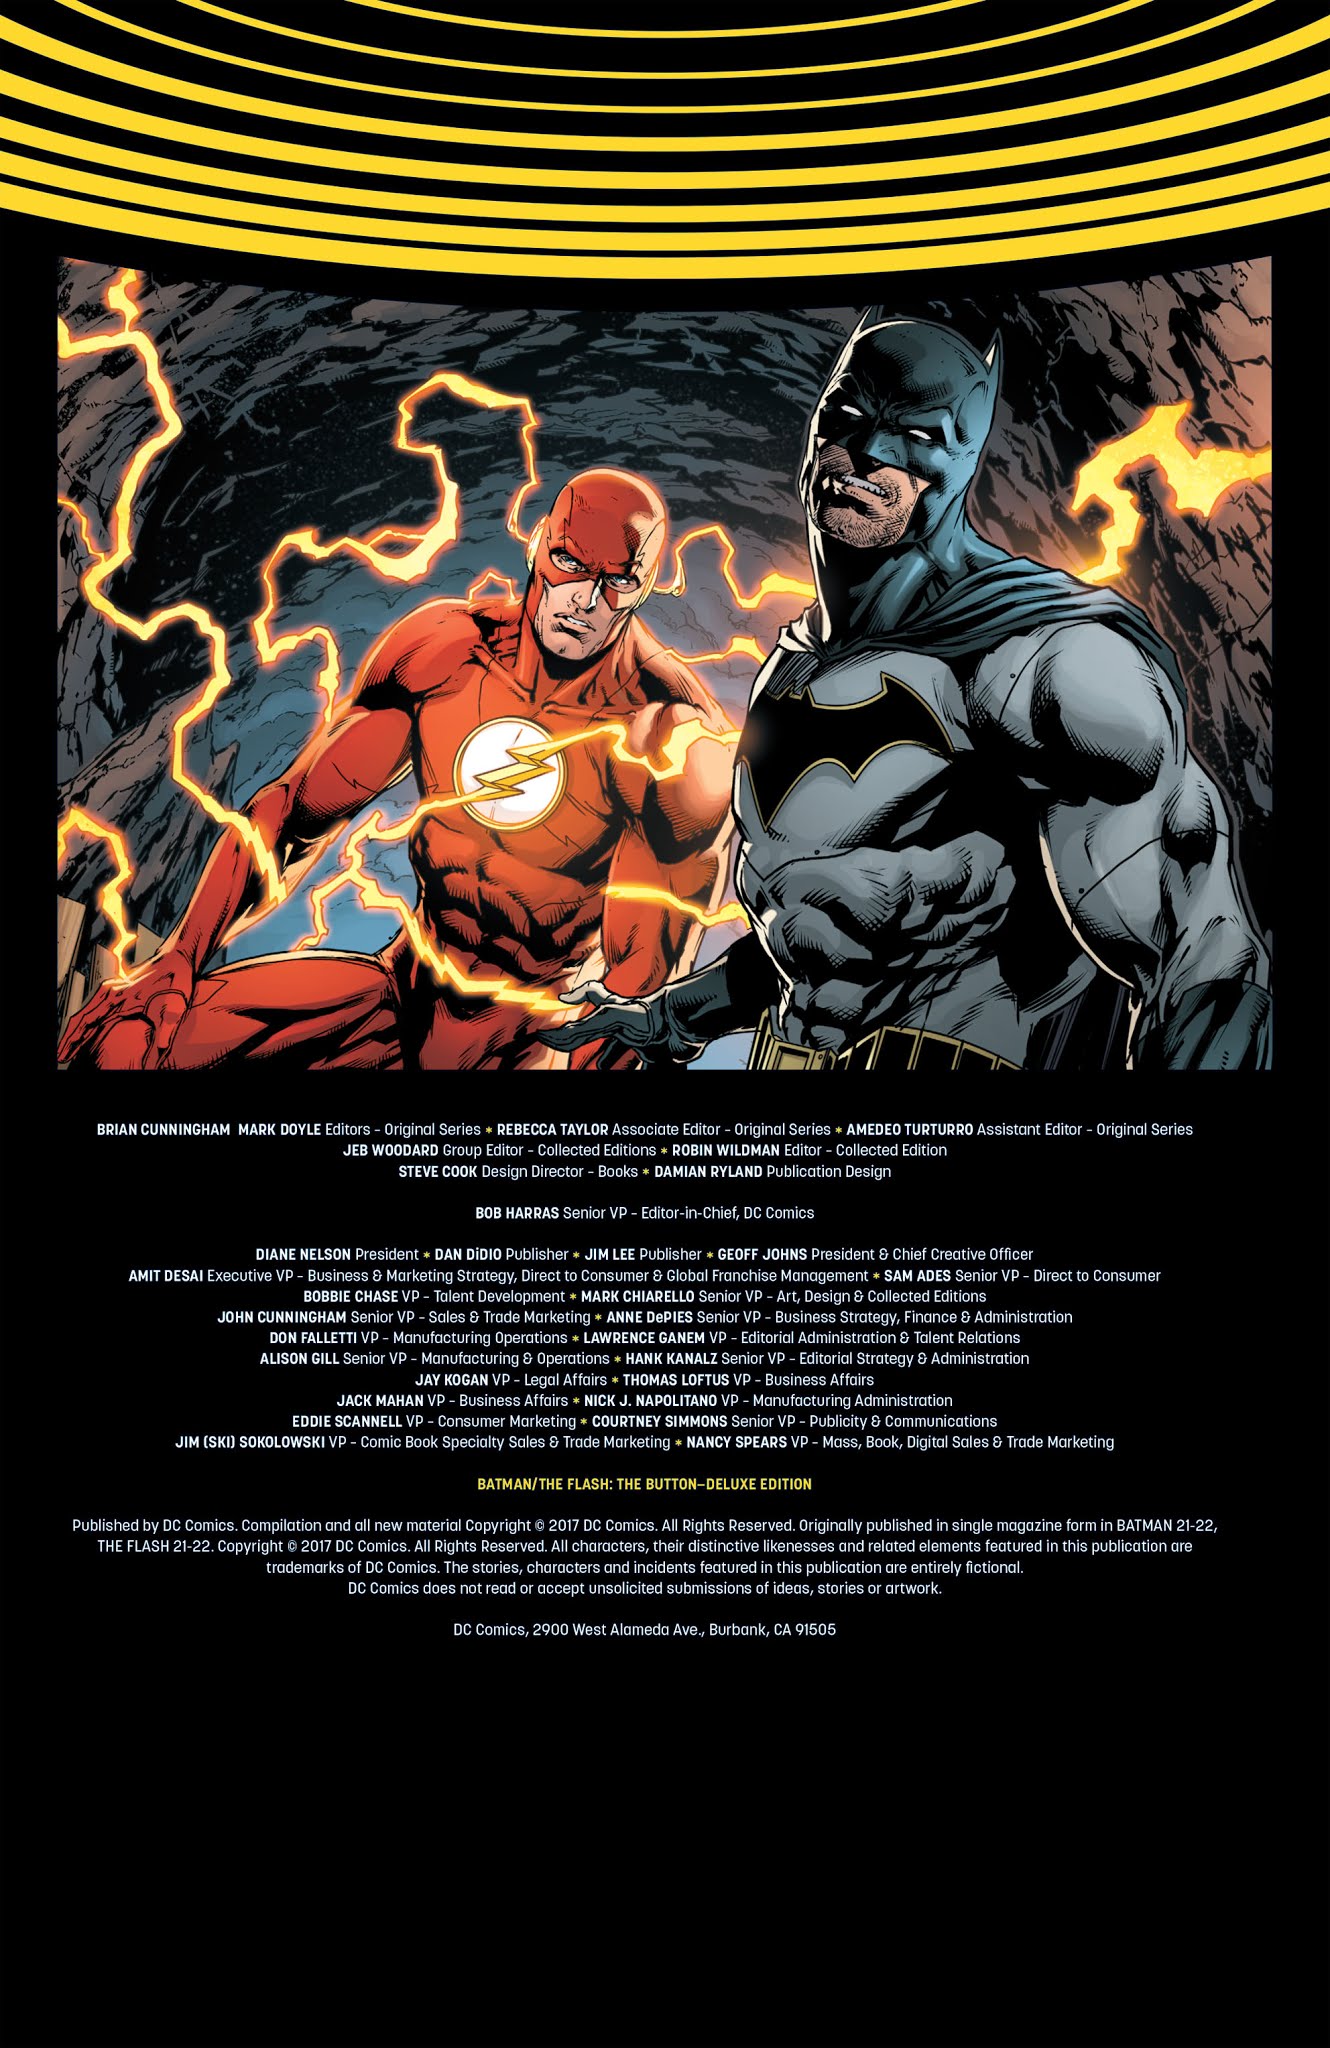 Read online Batman/The Flash The Button Deluxe Edition comic -  Issue # TPB - 4